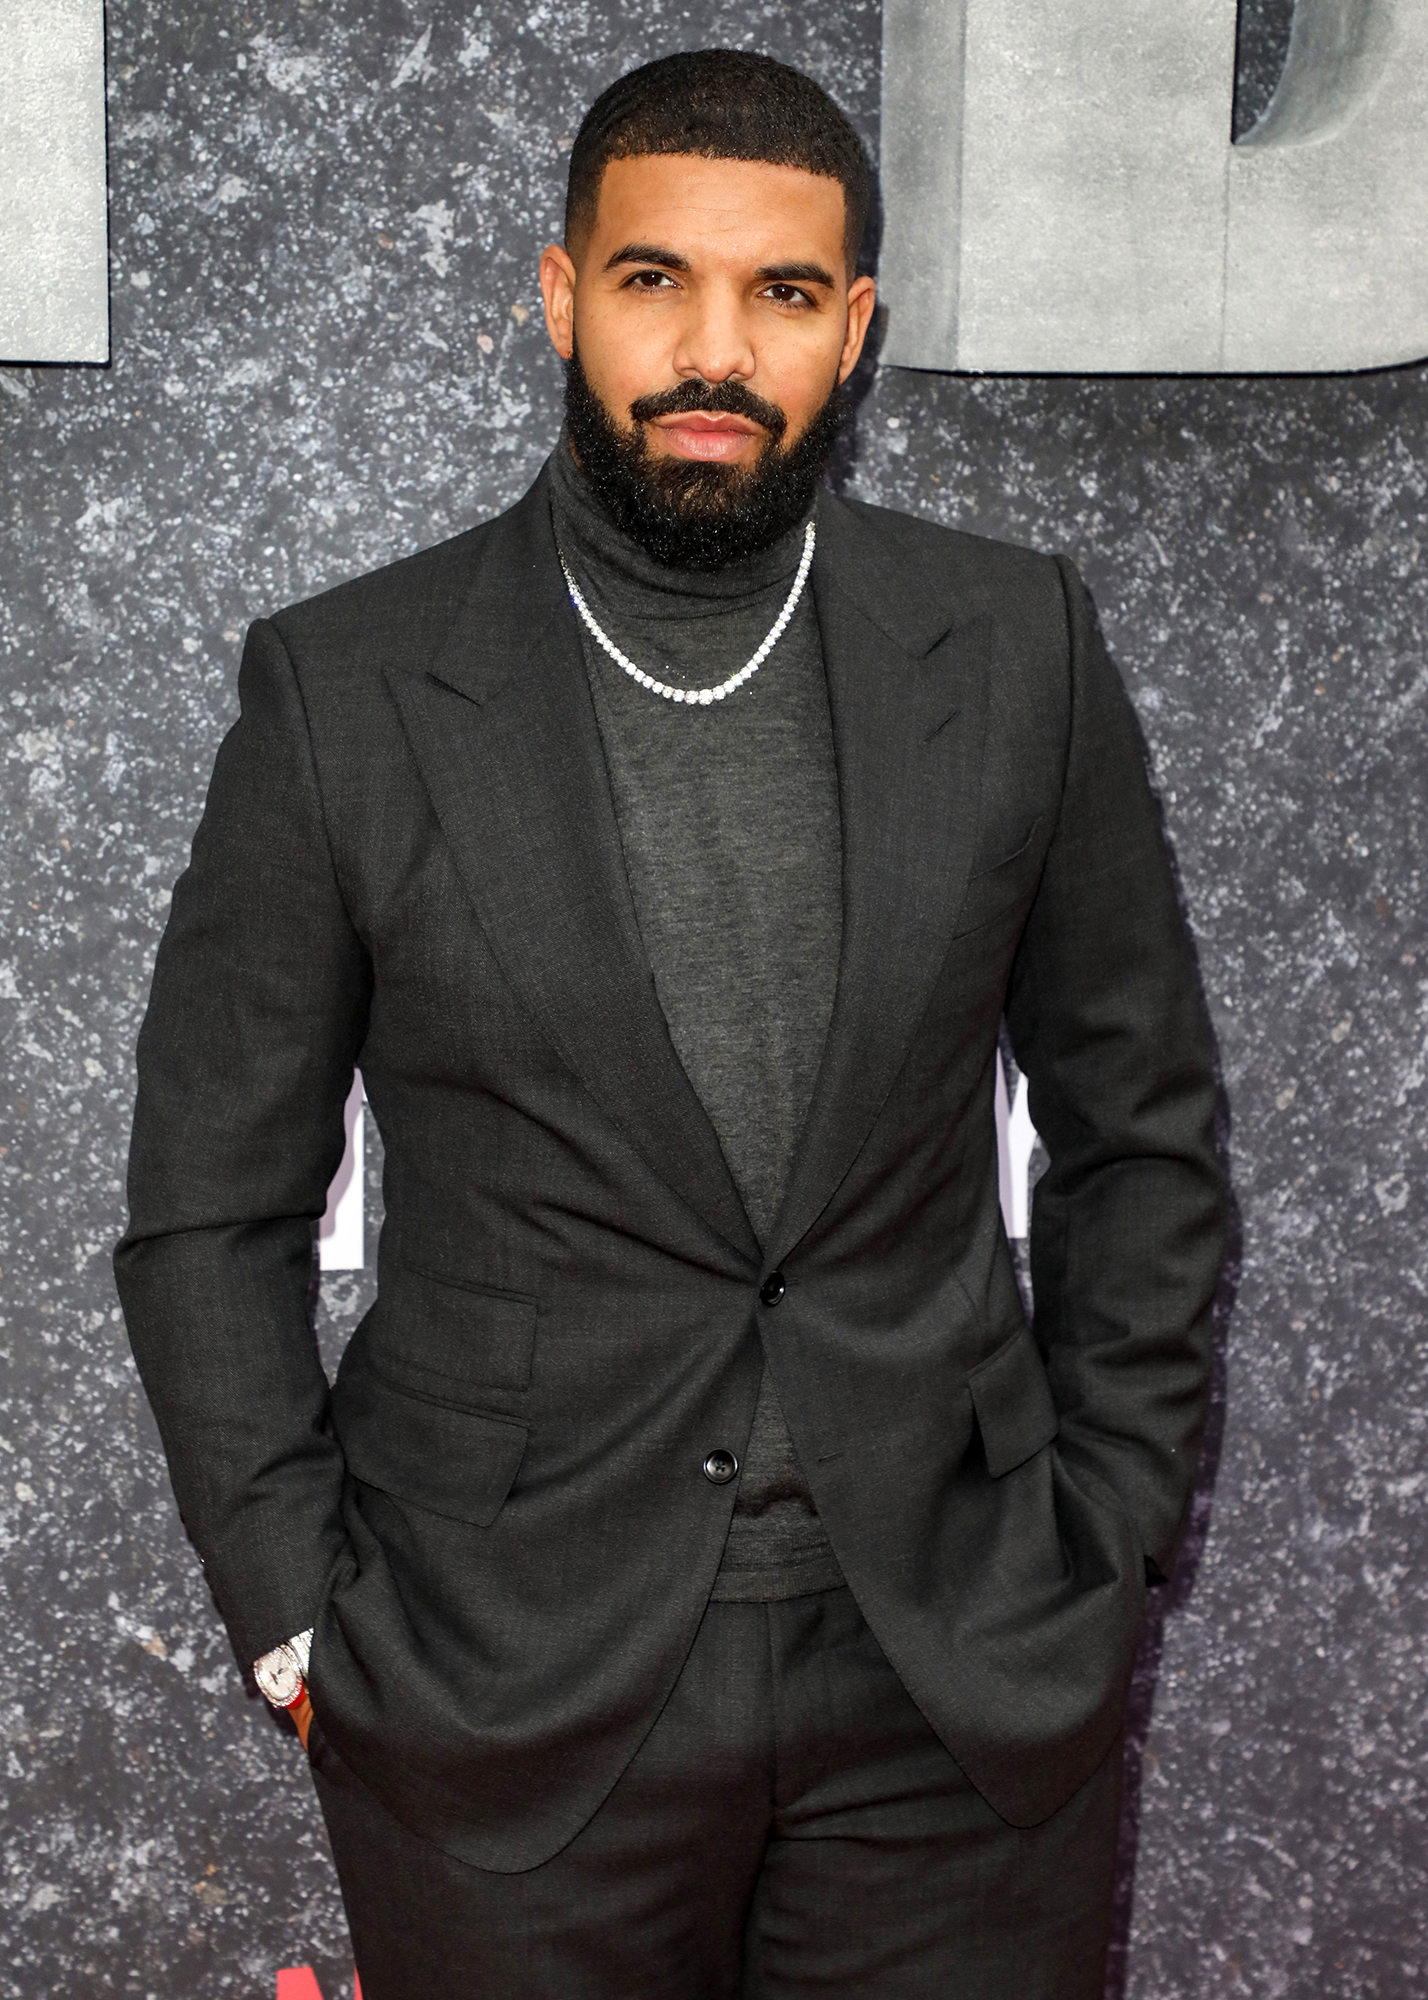 Inside Drake's Untold Truth: What's Really Behind His Reluctance to ...